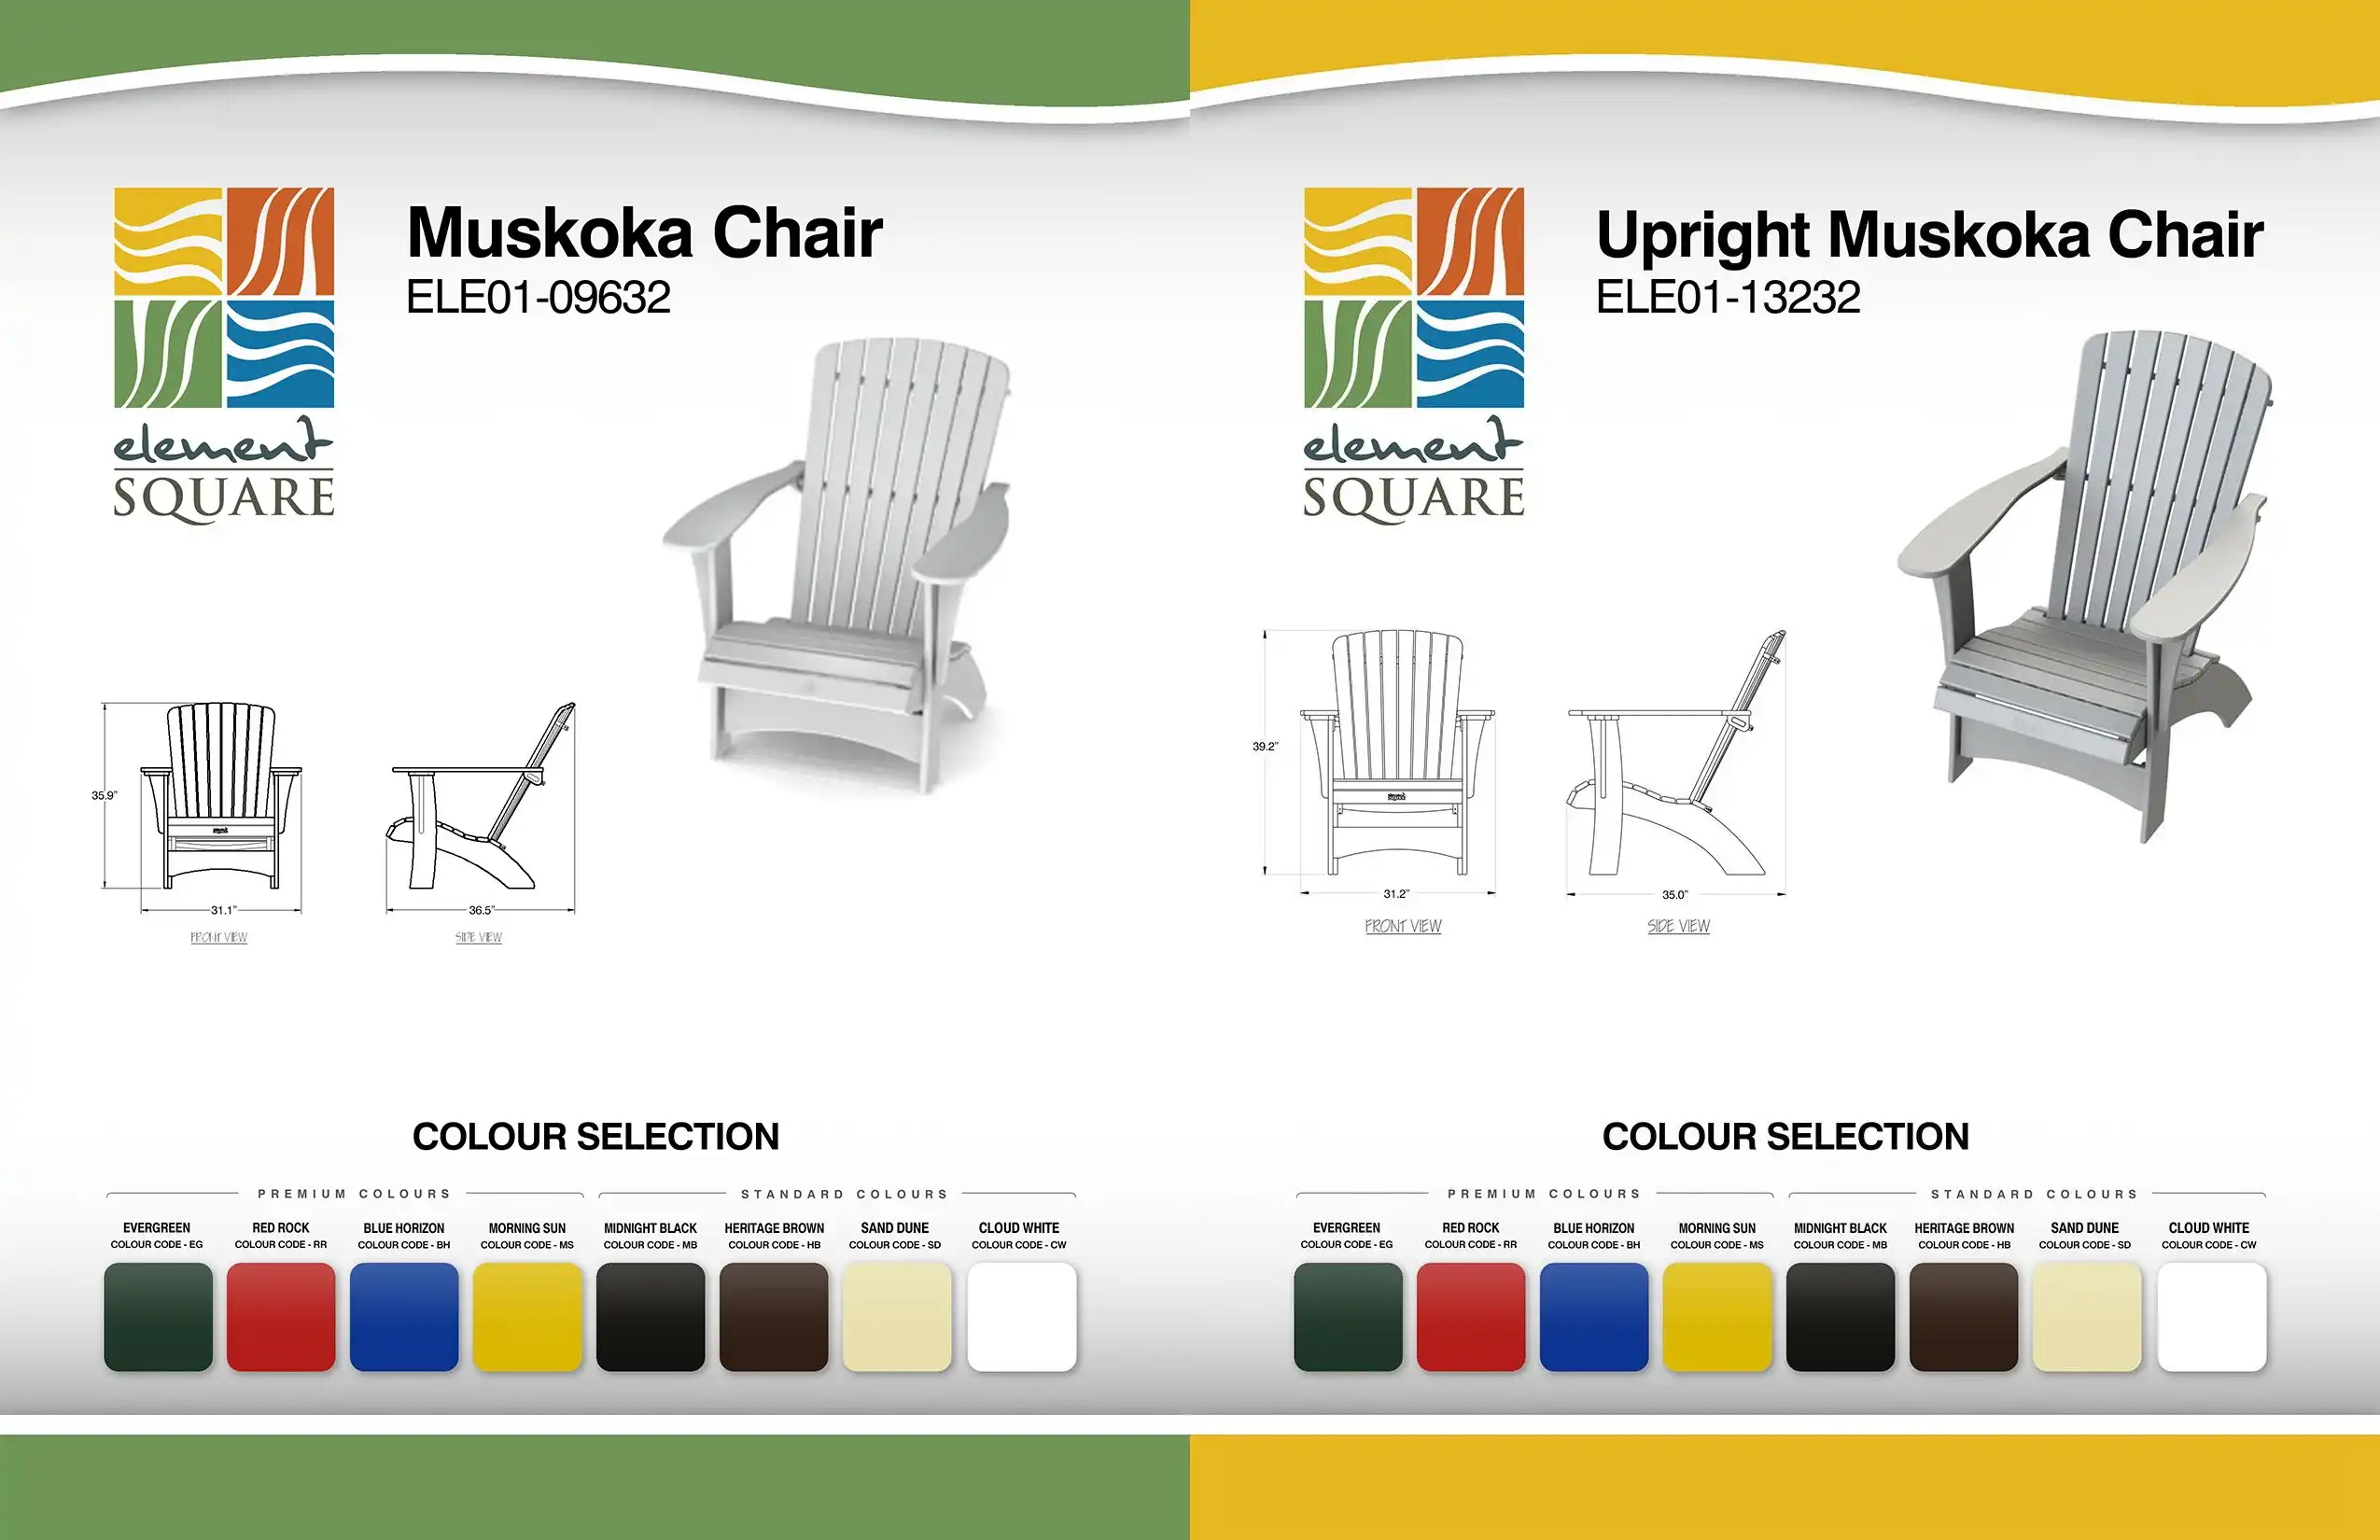 LOW-BACK & UPRIGHT MUSKOKA CHAIRS by Element Square